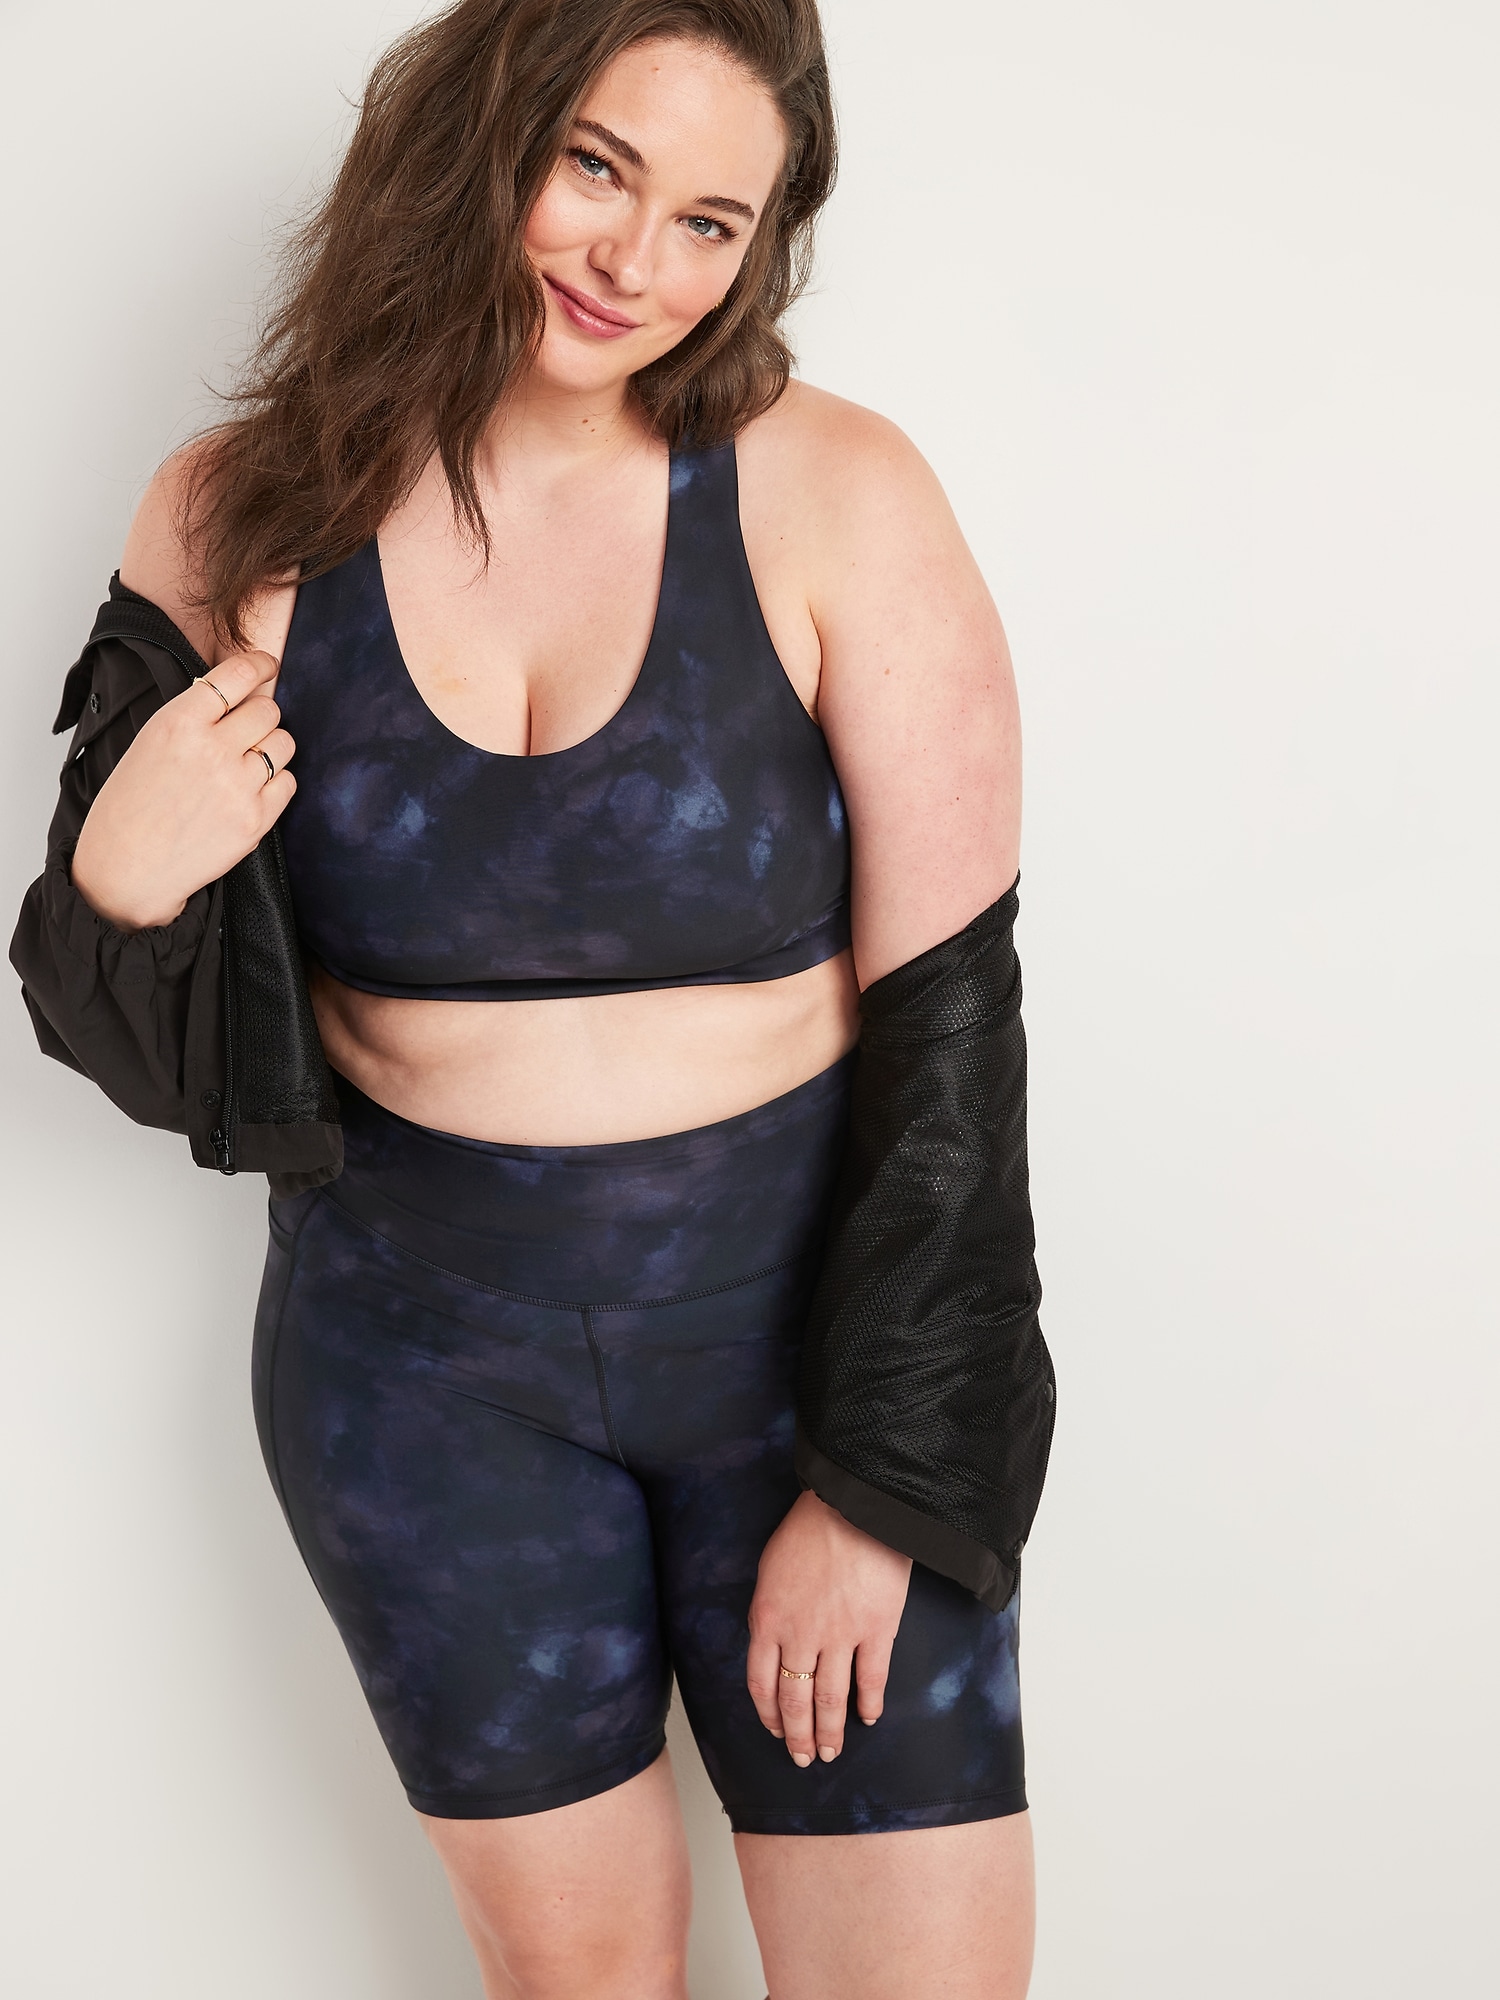 Old Navy Medium Support PowerSoft Cross-Back Cutout Sports Bra, 29 New  Activewear Pieces From Old Navy We're Loving This November, Starting at $20